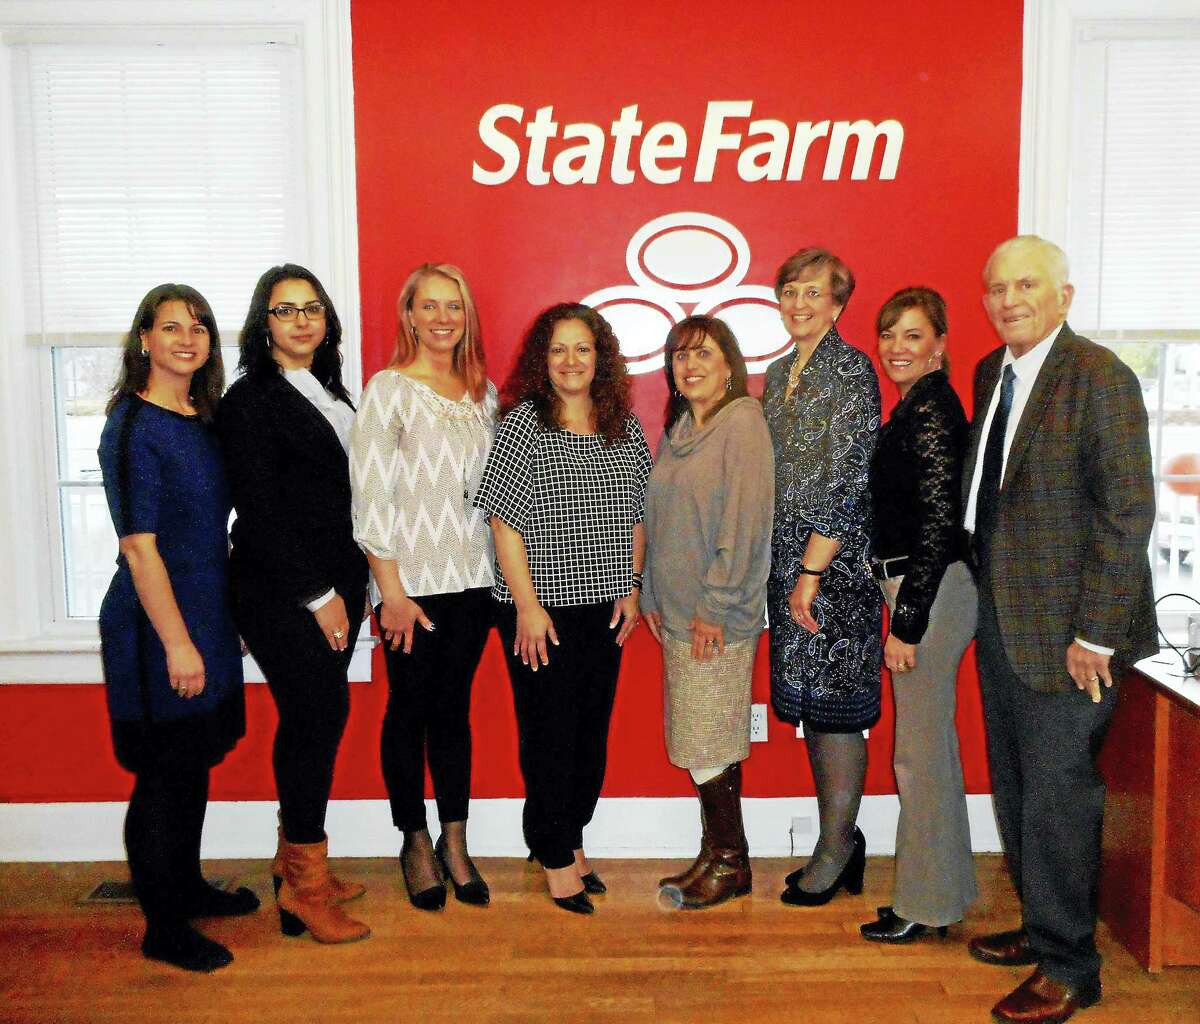 State Farm Insurance in Portland held its grand opening Feb. 4. From left are: state Rep. Christie Carpino, State Farm personal account representatives Kattie Viveiros and Sharon Leland, and owner/agent Mimma Burke; Town Planner Deanna Rhodes, Economic Development Consultant Mary Dickerson, Chamber Vice President Johanna Bond, and Chamber President Larry McHugh.